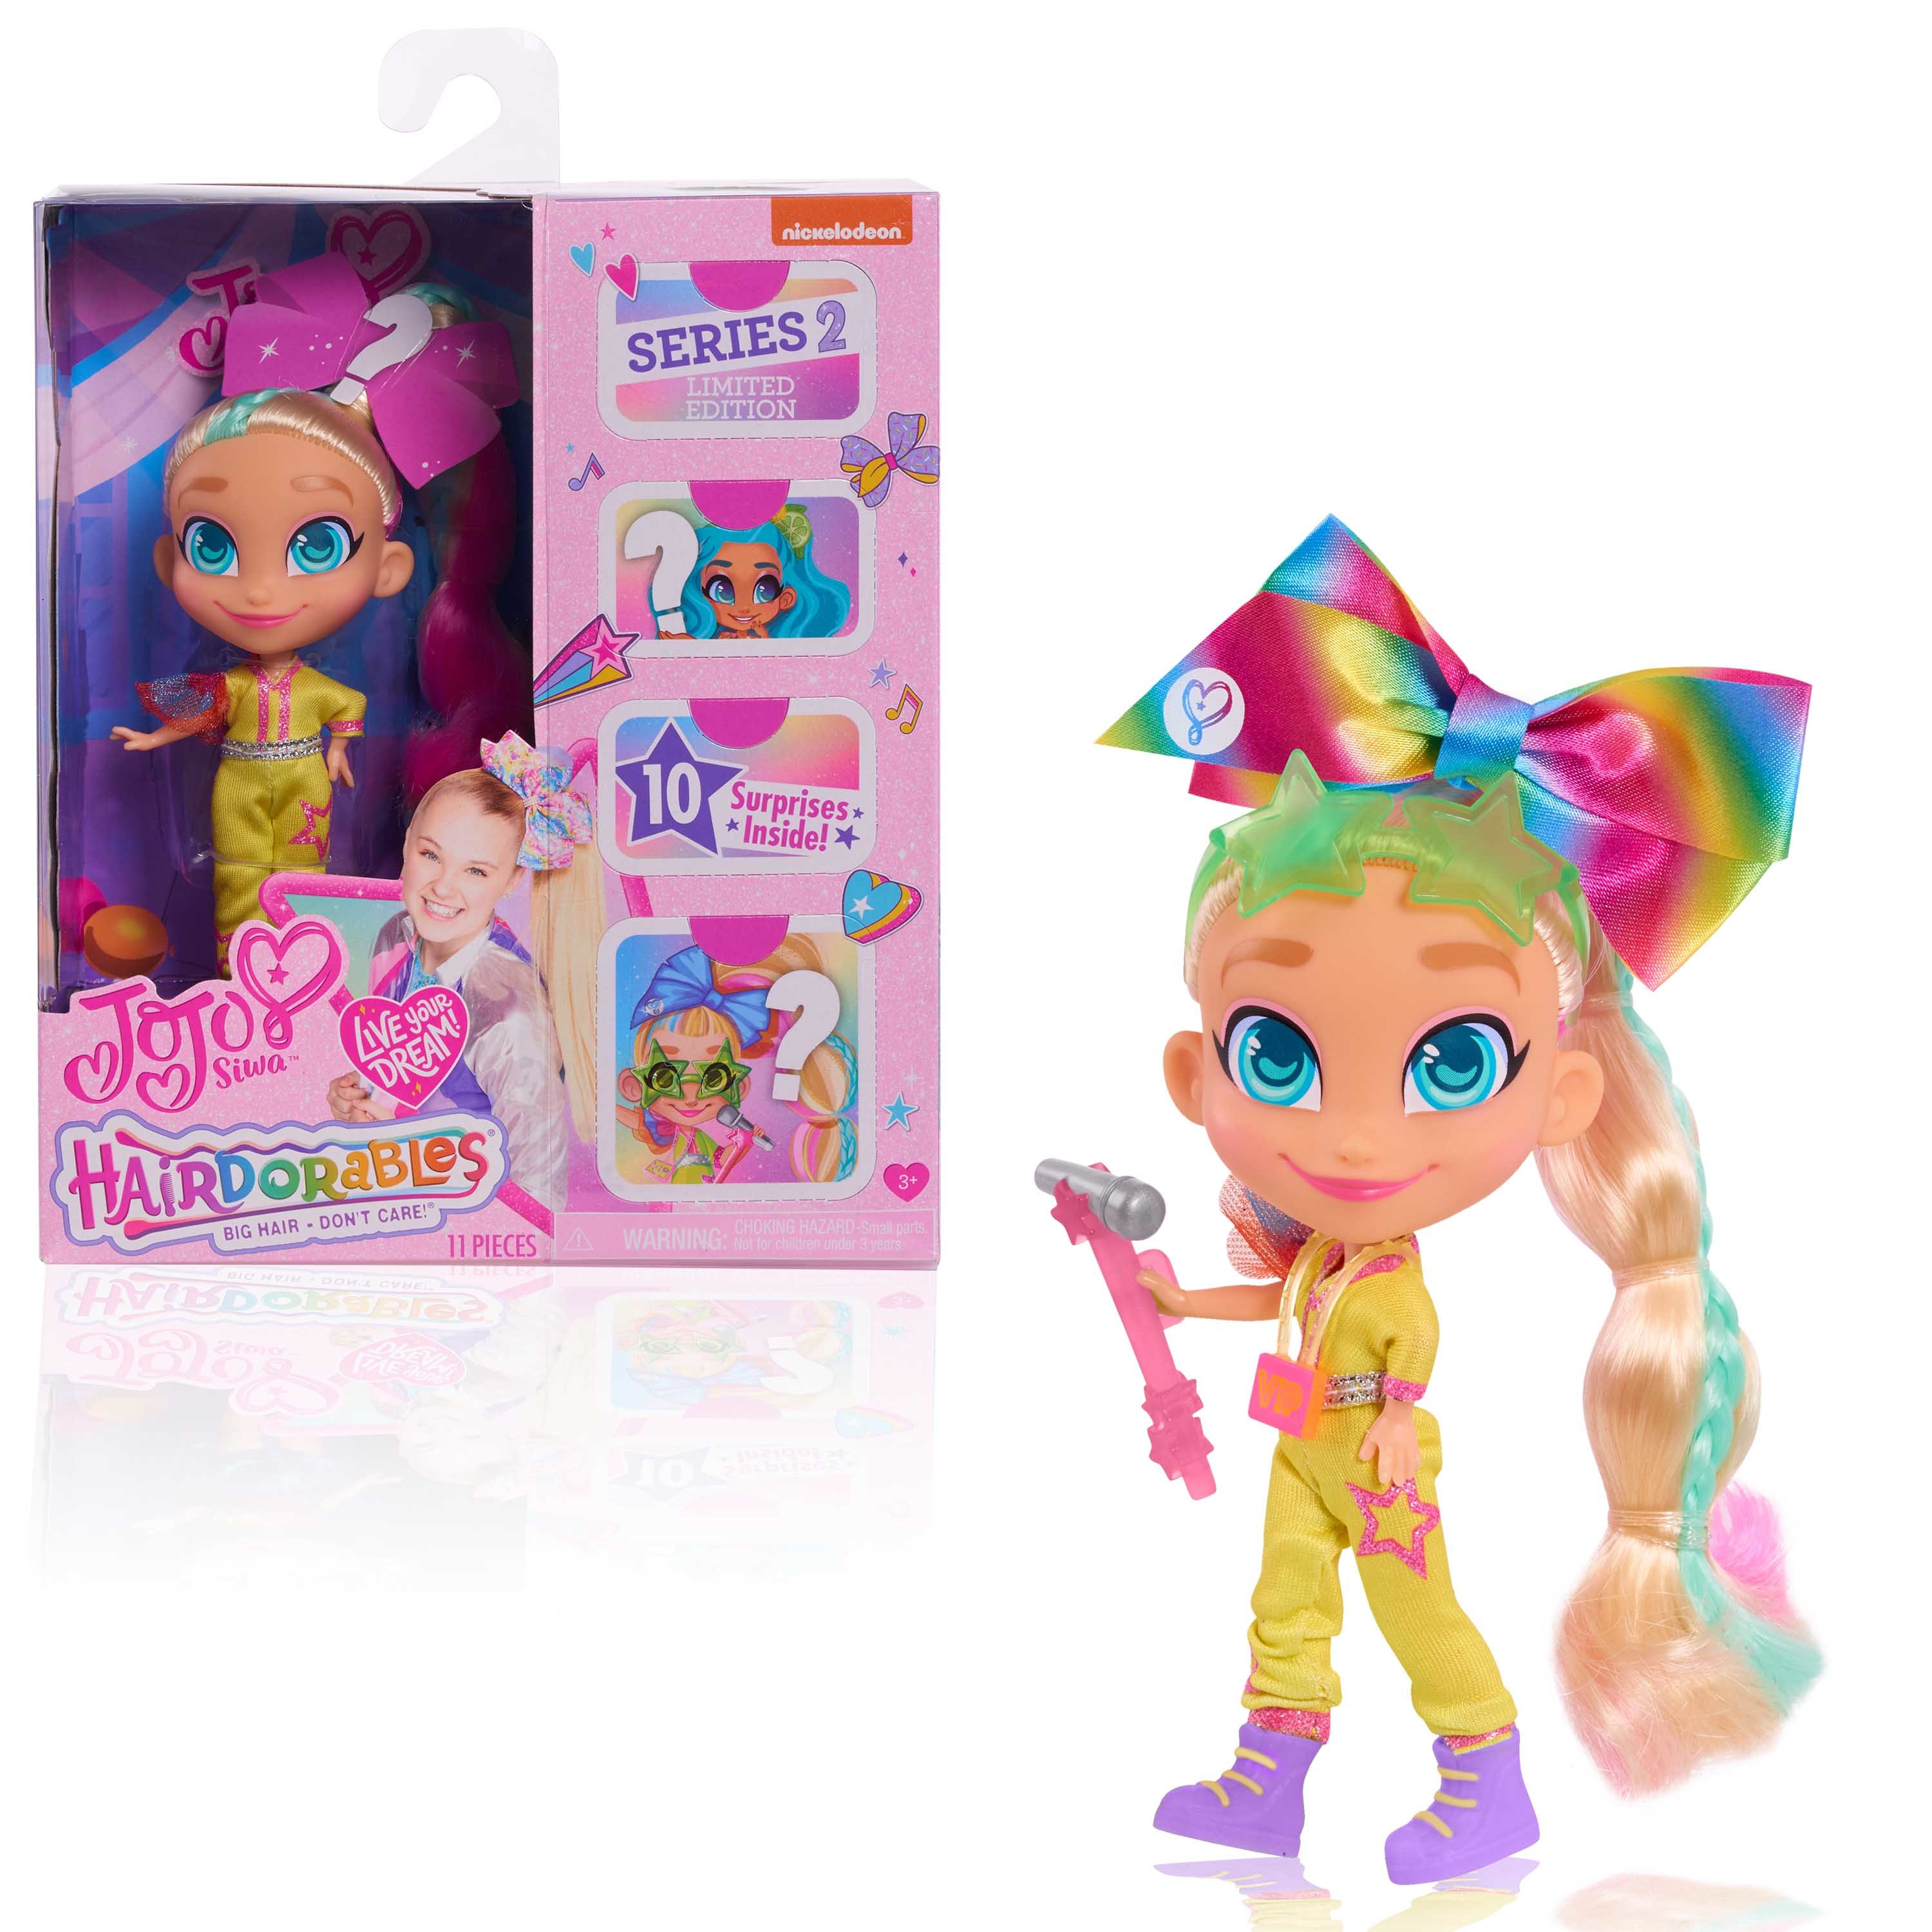 JoJo Siwa JoJo Loves Hairdorables Limited Edition Collectible Doll,  Kids Toys for Ages 3 Up, Gifts and Presents - image 2 of 2